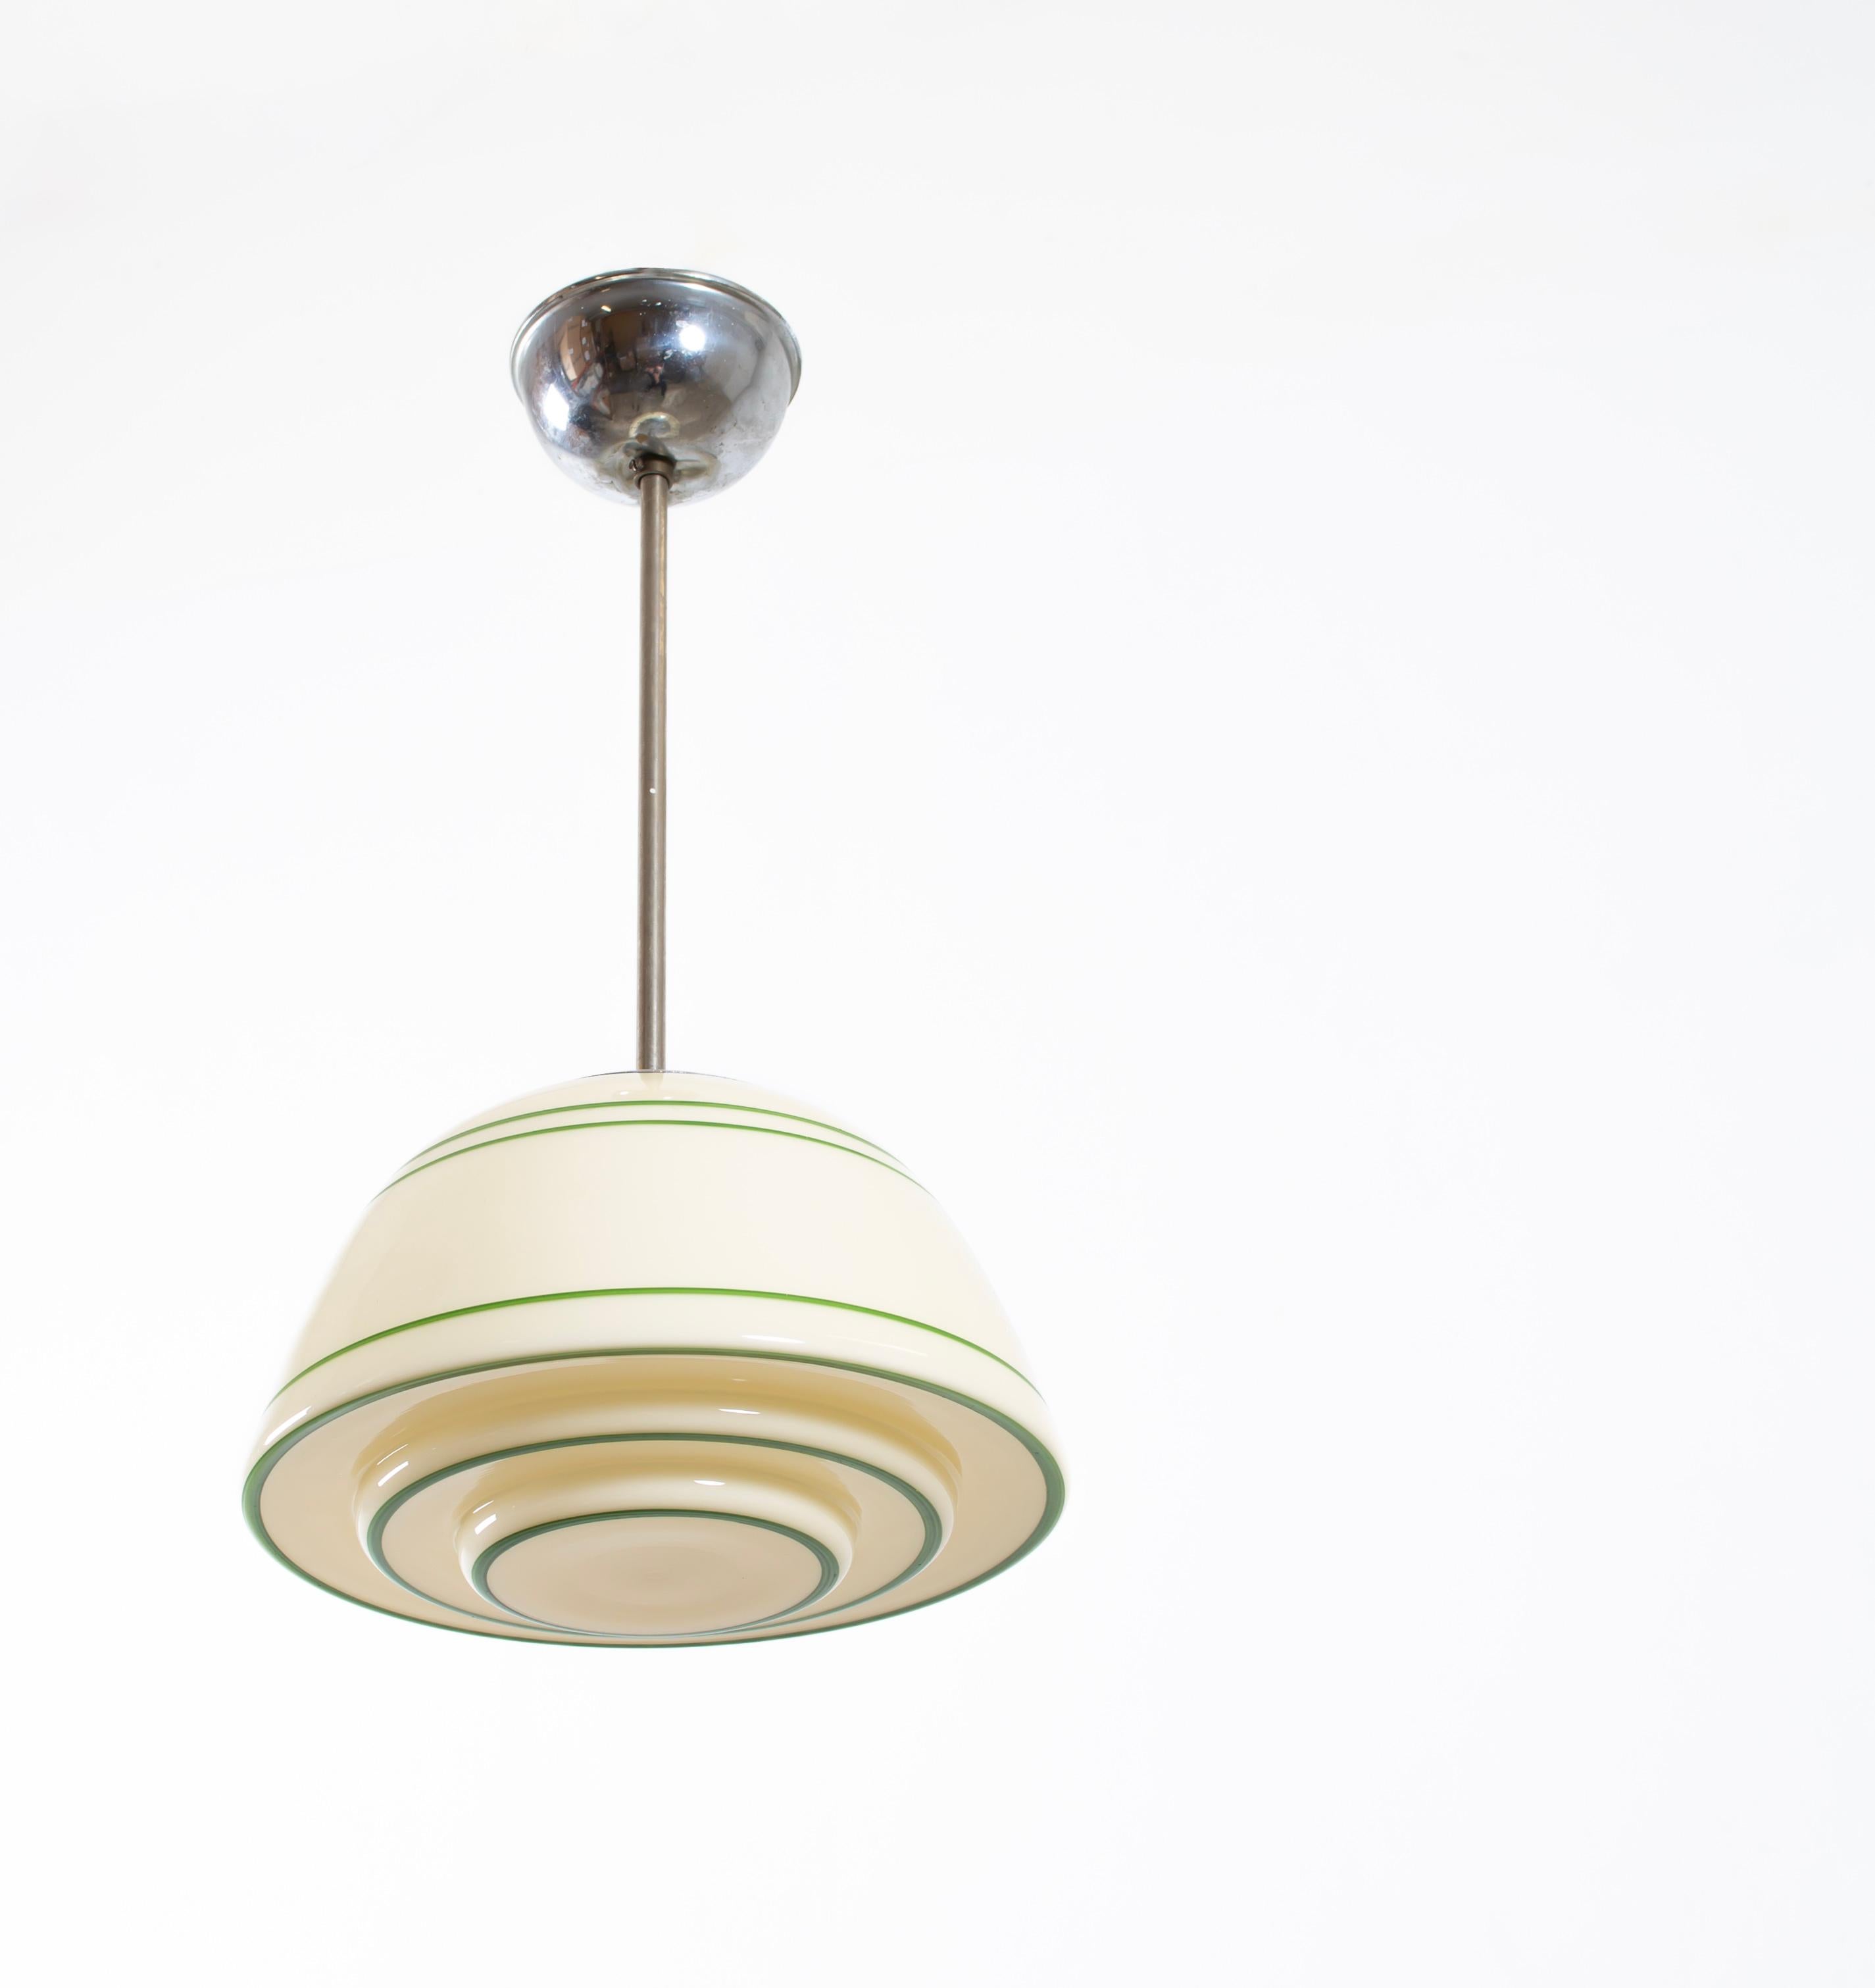 Scandinavian Mid Century Ceiling Light, Norway, 1950s In Good Condition For Sale In Oslo, NO